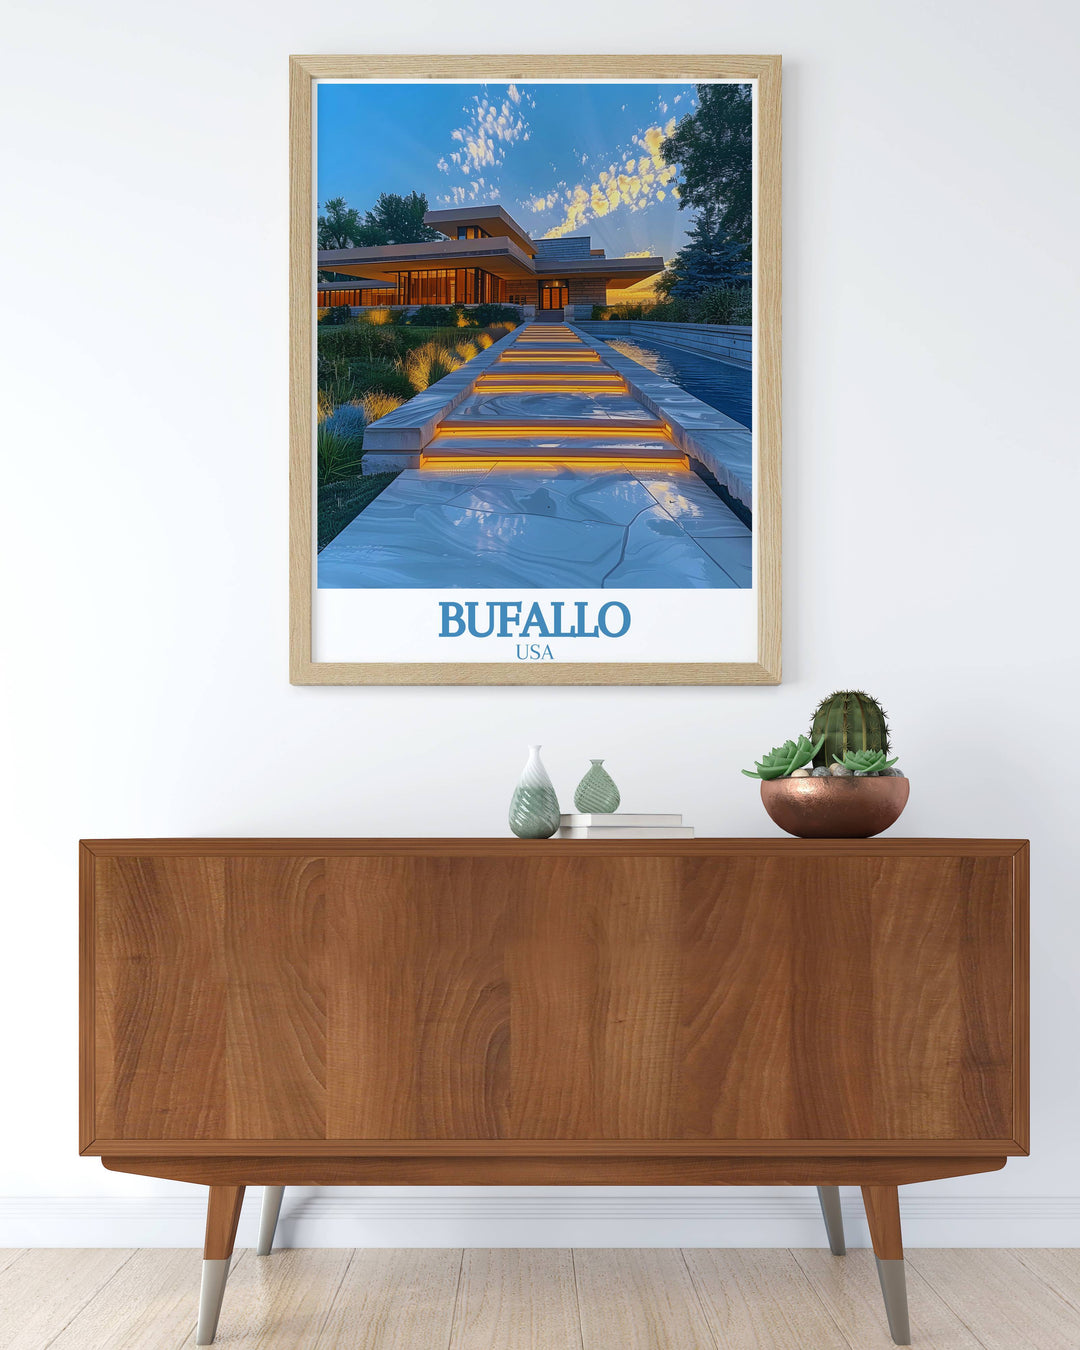 Stunning wall art of Buffalo skyline and Frank Lloyd Wrights Darwin D Martin House ideal for enhancing home decor with a touch of sophistication showcasing Buffalos architectural marvels